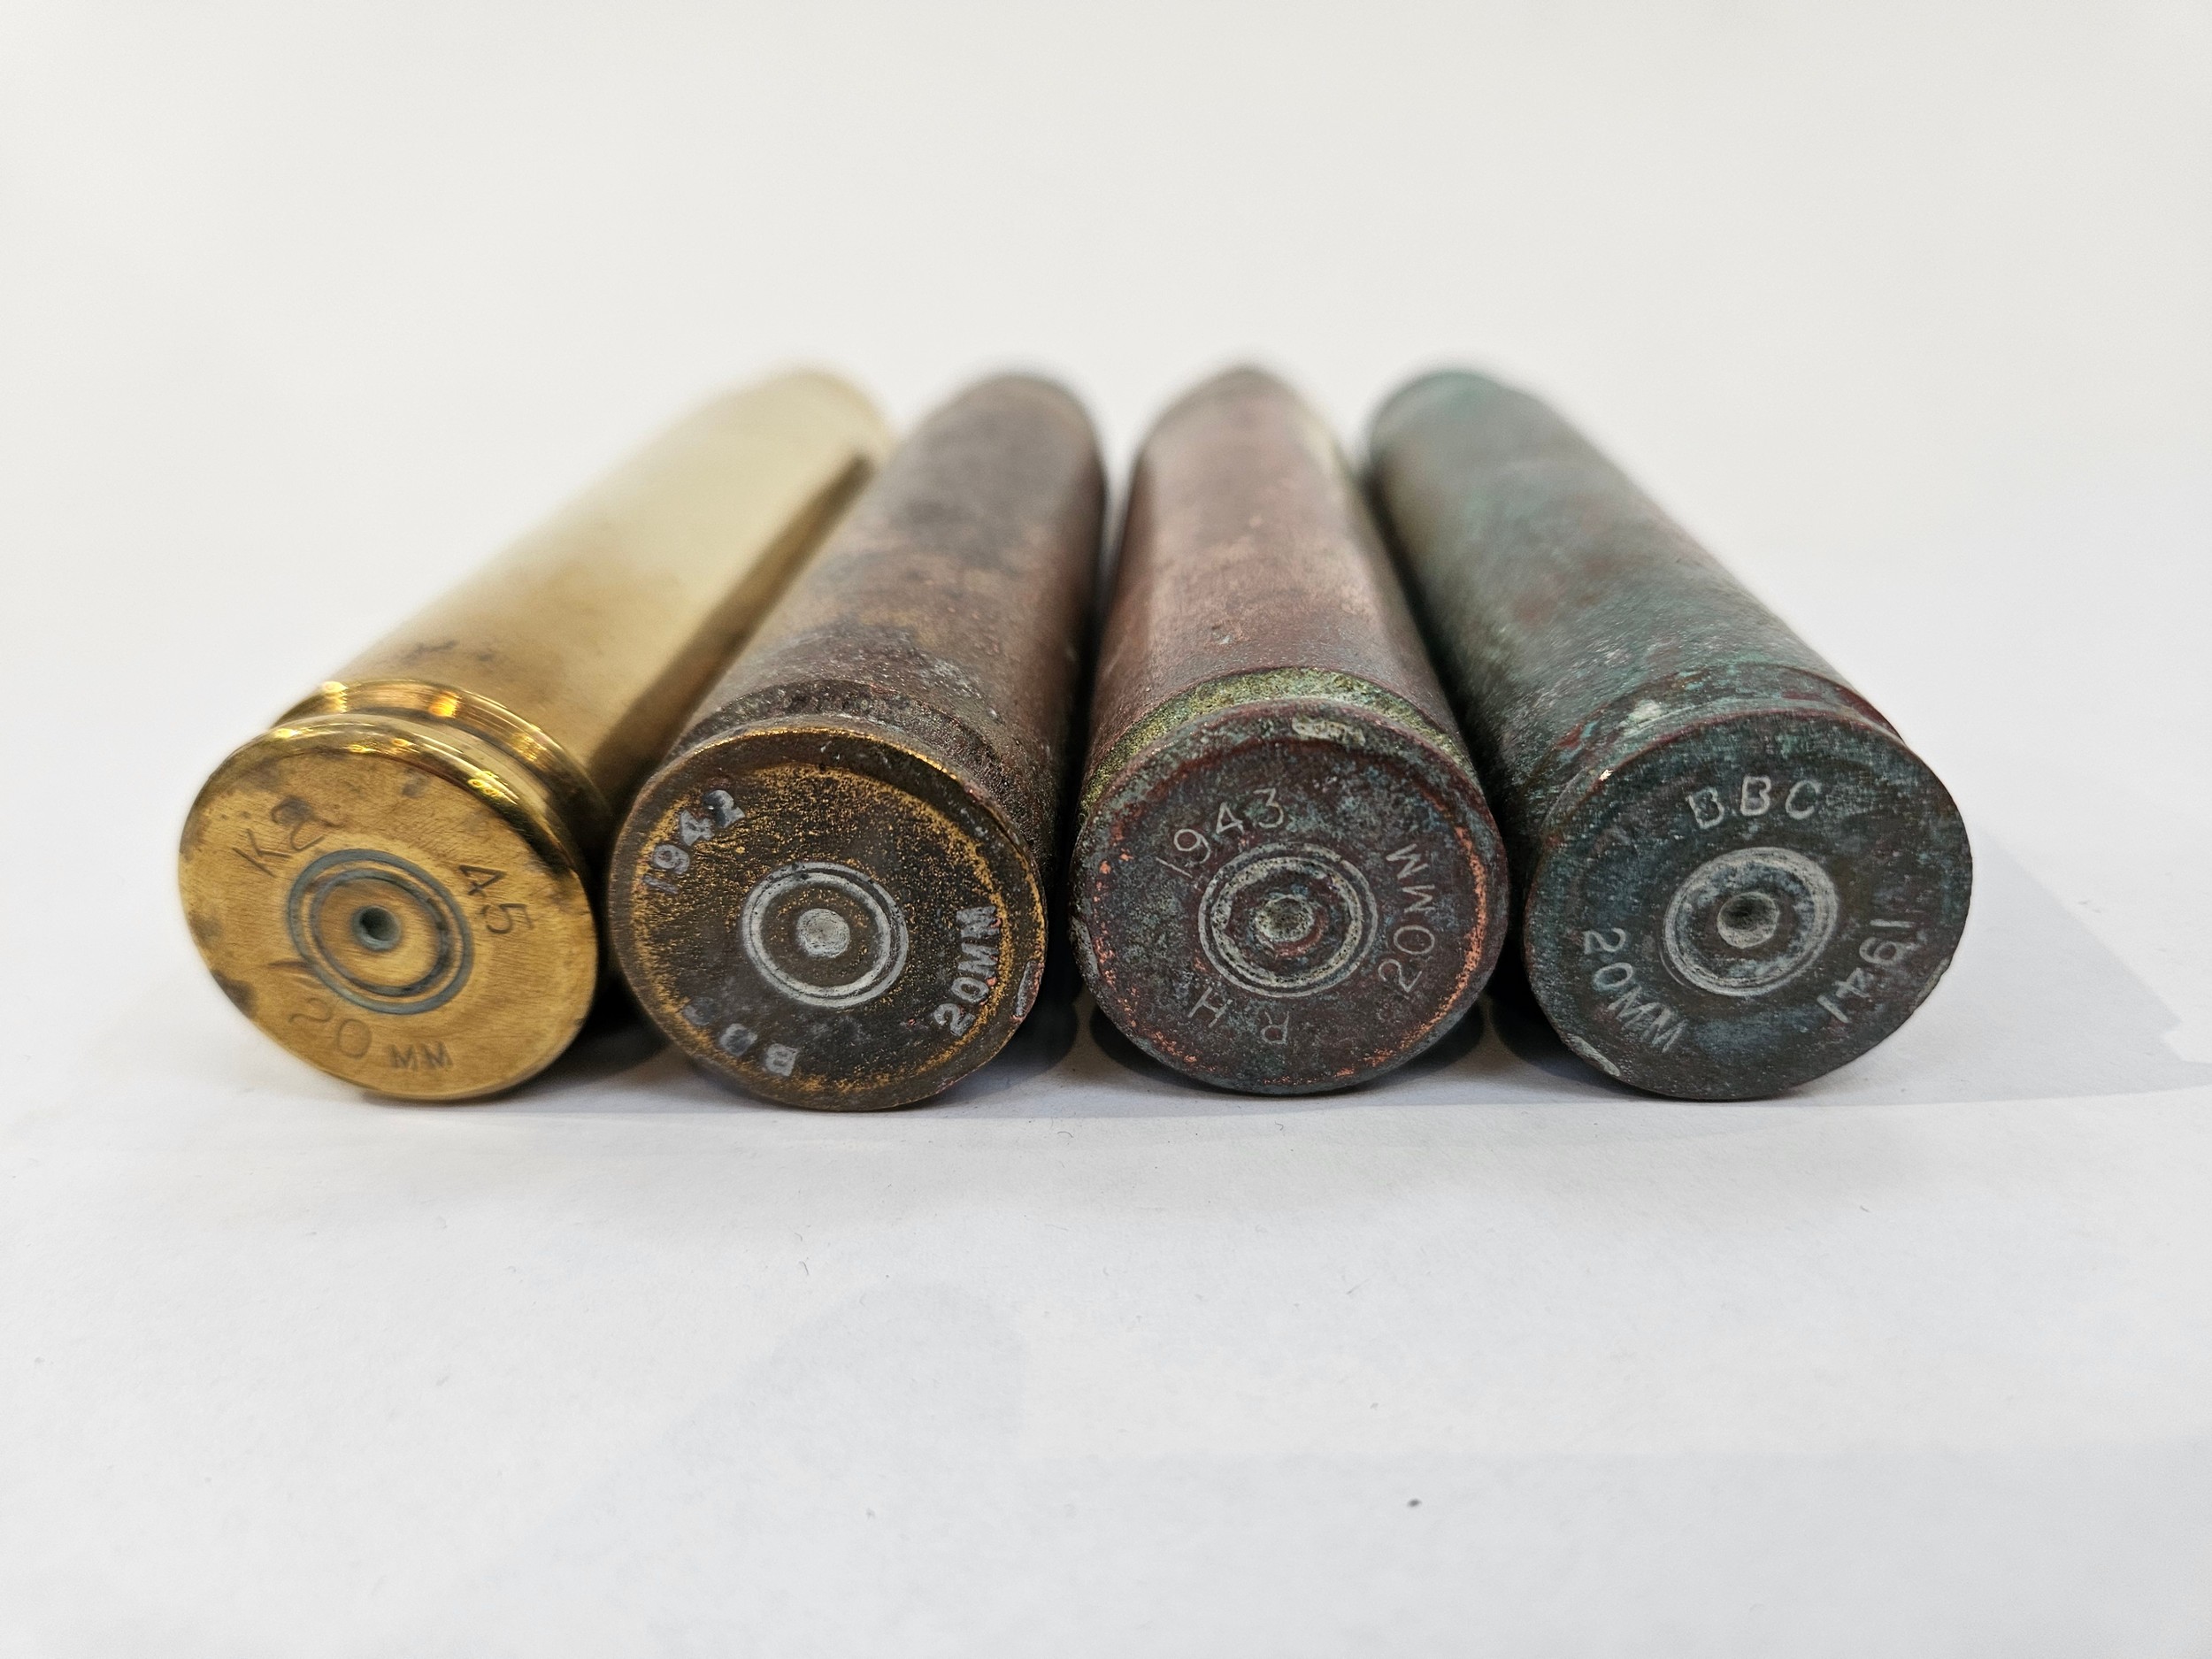 Ten 20mm cannon shell cases as used by RAF Spitfires, Hurricanes and Tempests, including 1941, - Image 4 of 4